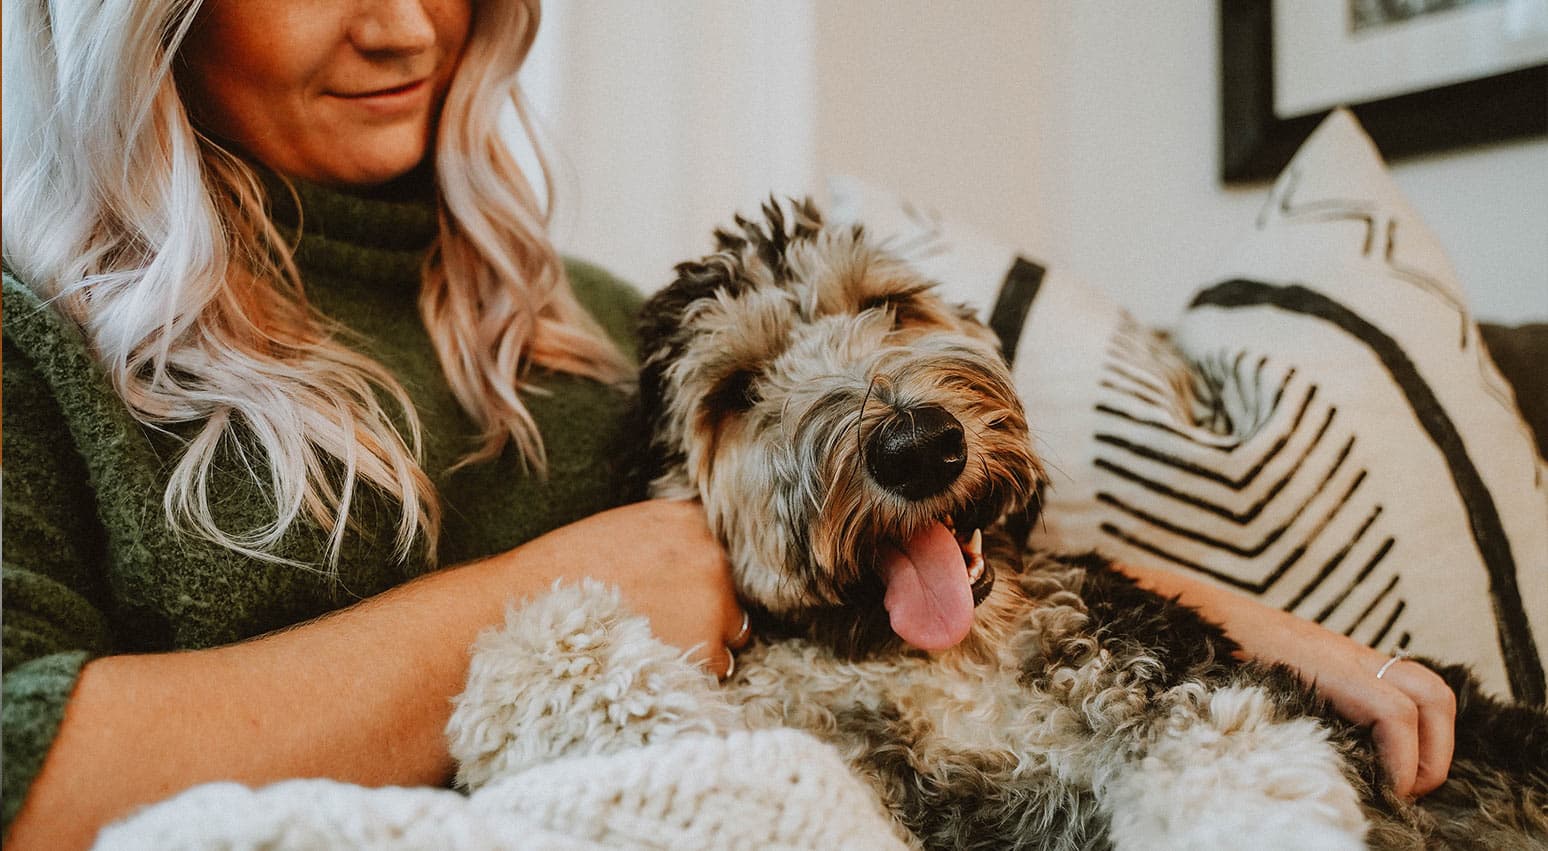 https://images.ctfassets.net/sa0sroutfts9/6vYDnLLgvg0bFCfXxCcotH/8ba340a8a4c32297c6b7c55ff4a9107e/woman-snuggling-with-her-dog.jpg